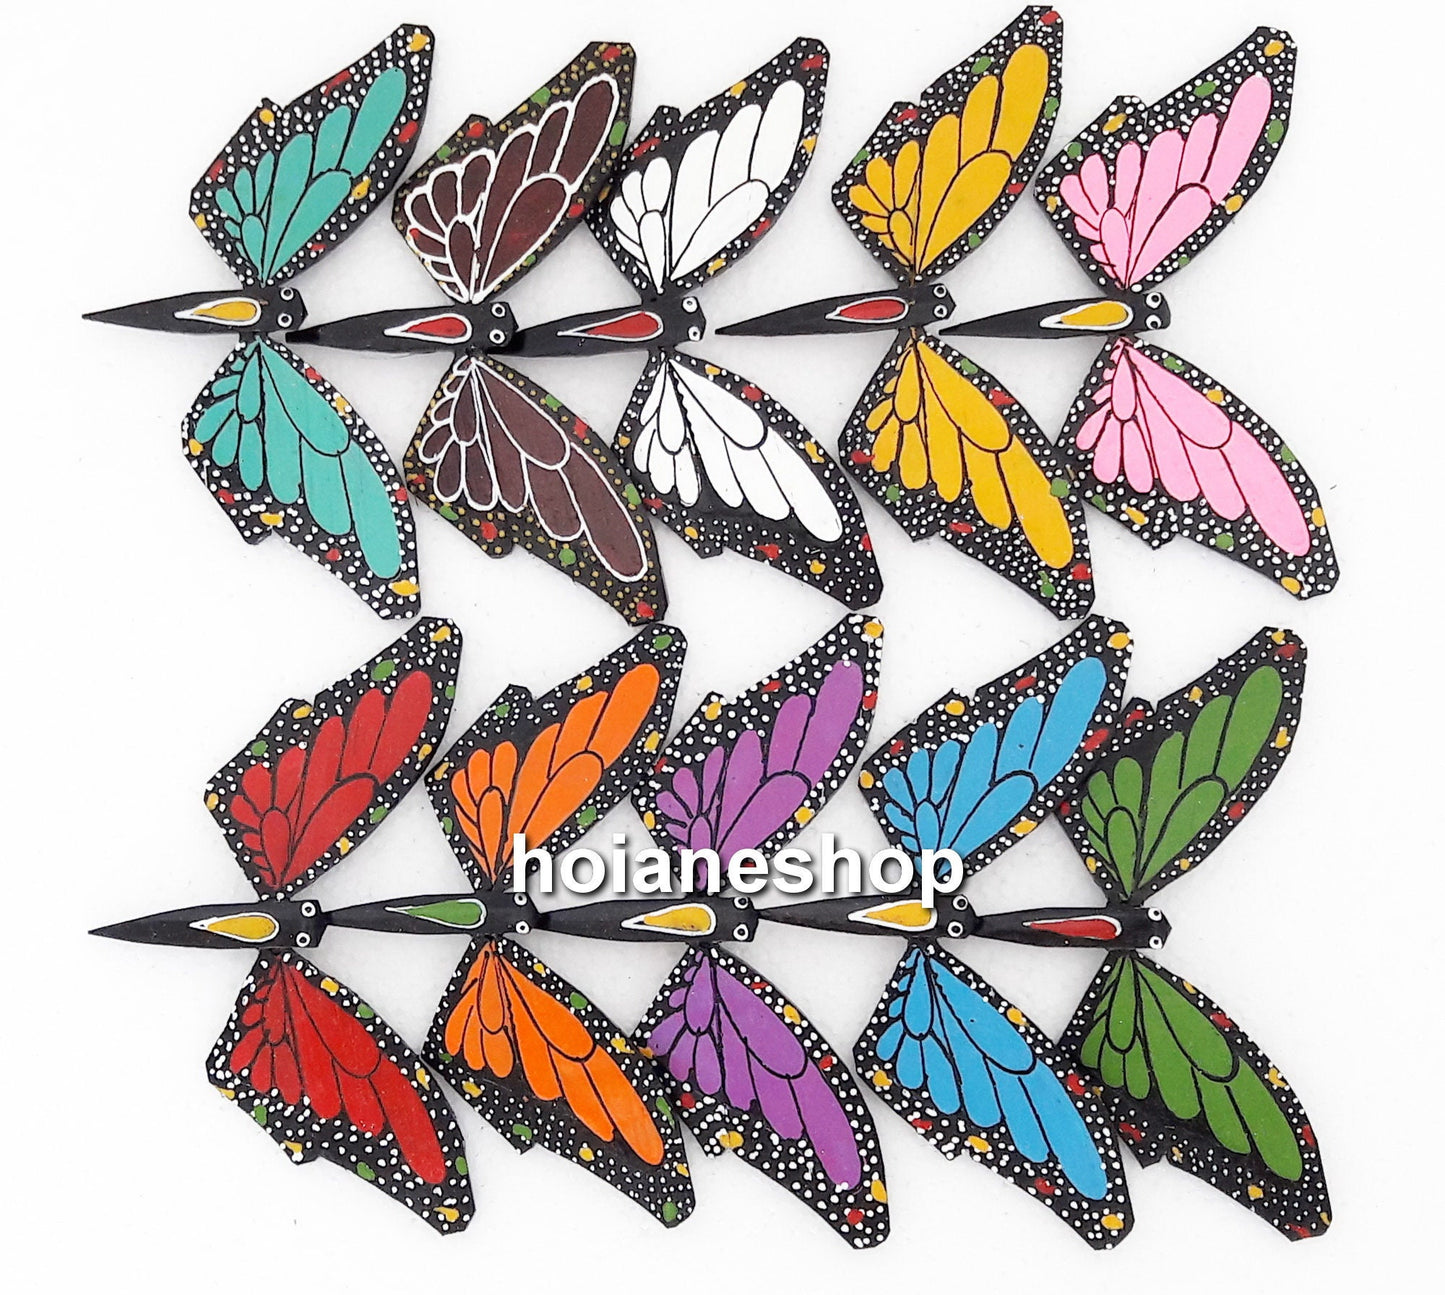 Set of 10 pcs hand-pained bamboo butterfly for children toys, wedding gifts, gifts for mom, gifts for baby